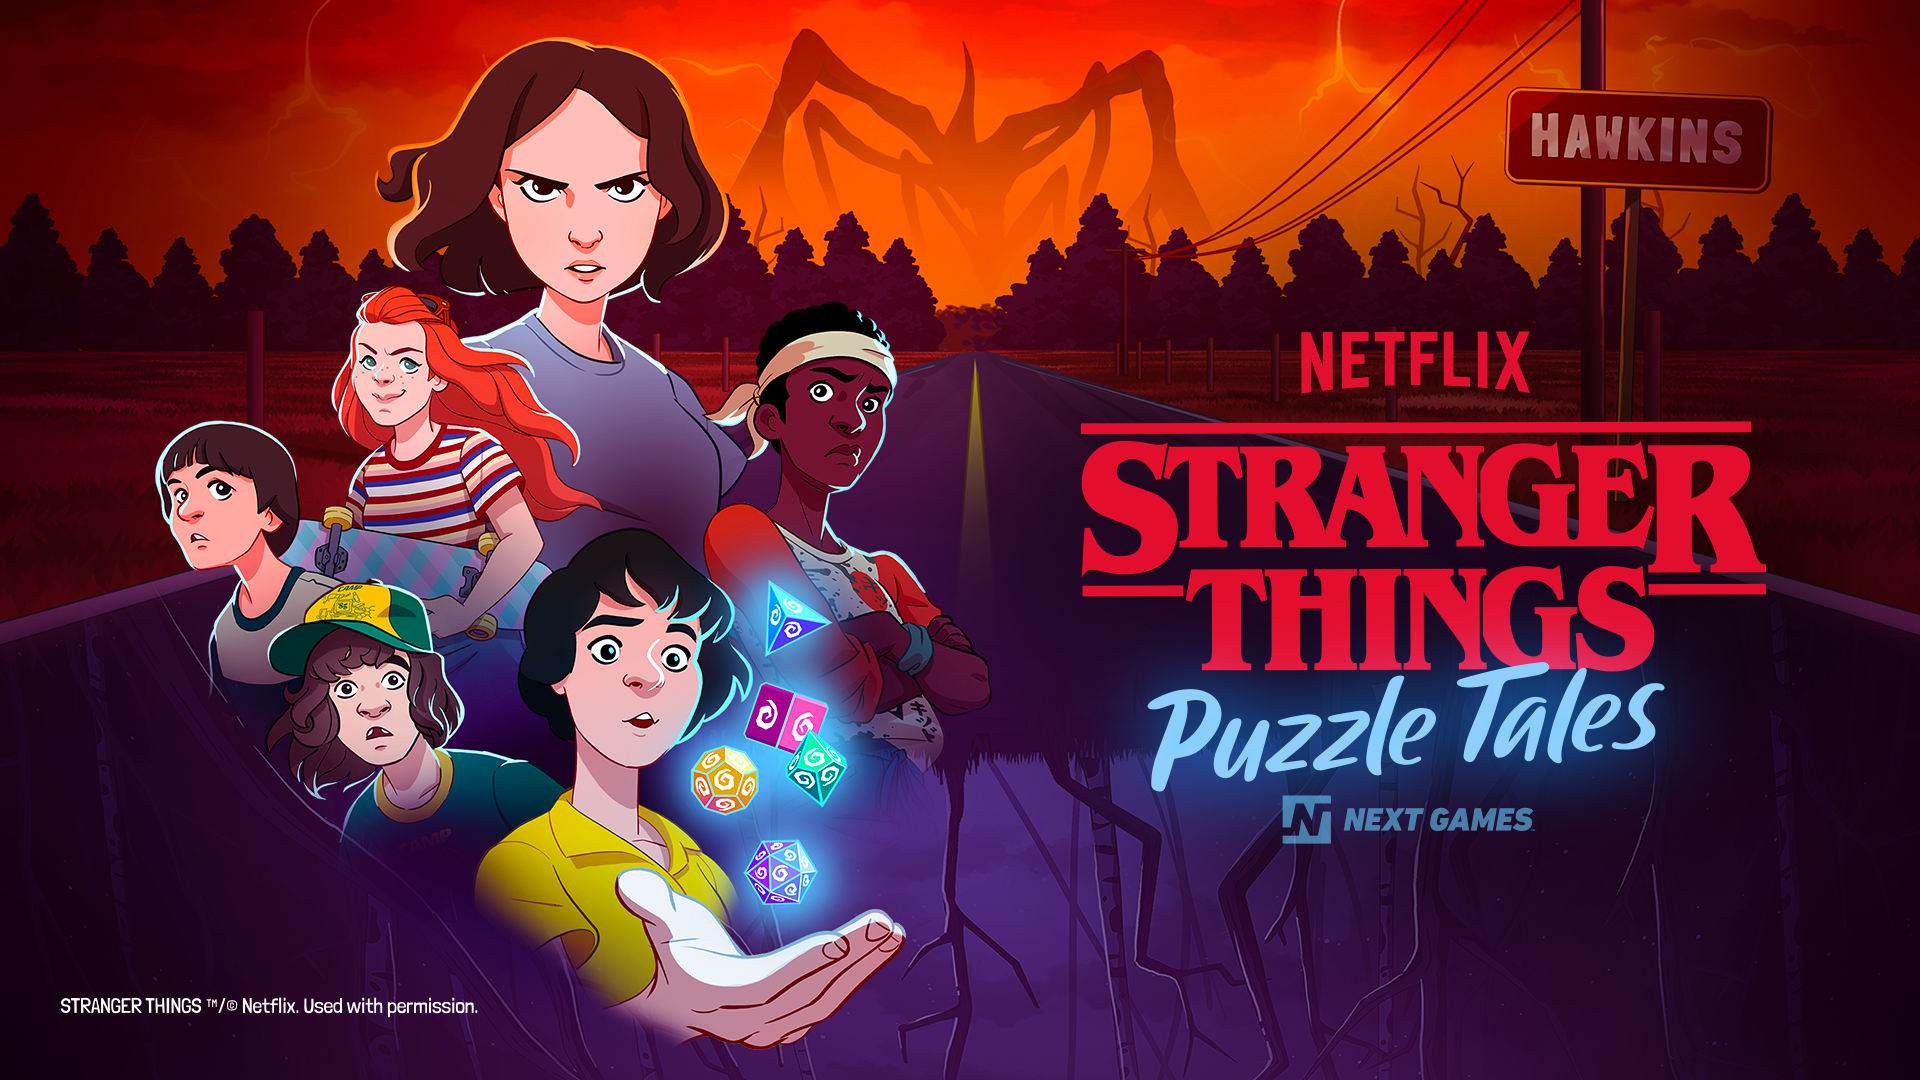 Stranger Things universe expands with Netflix animated series: 'The  adventure continues'